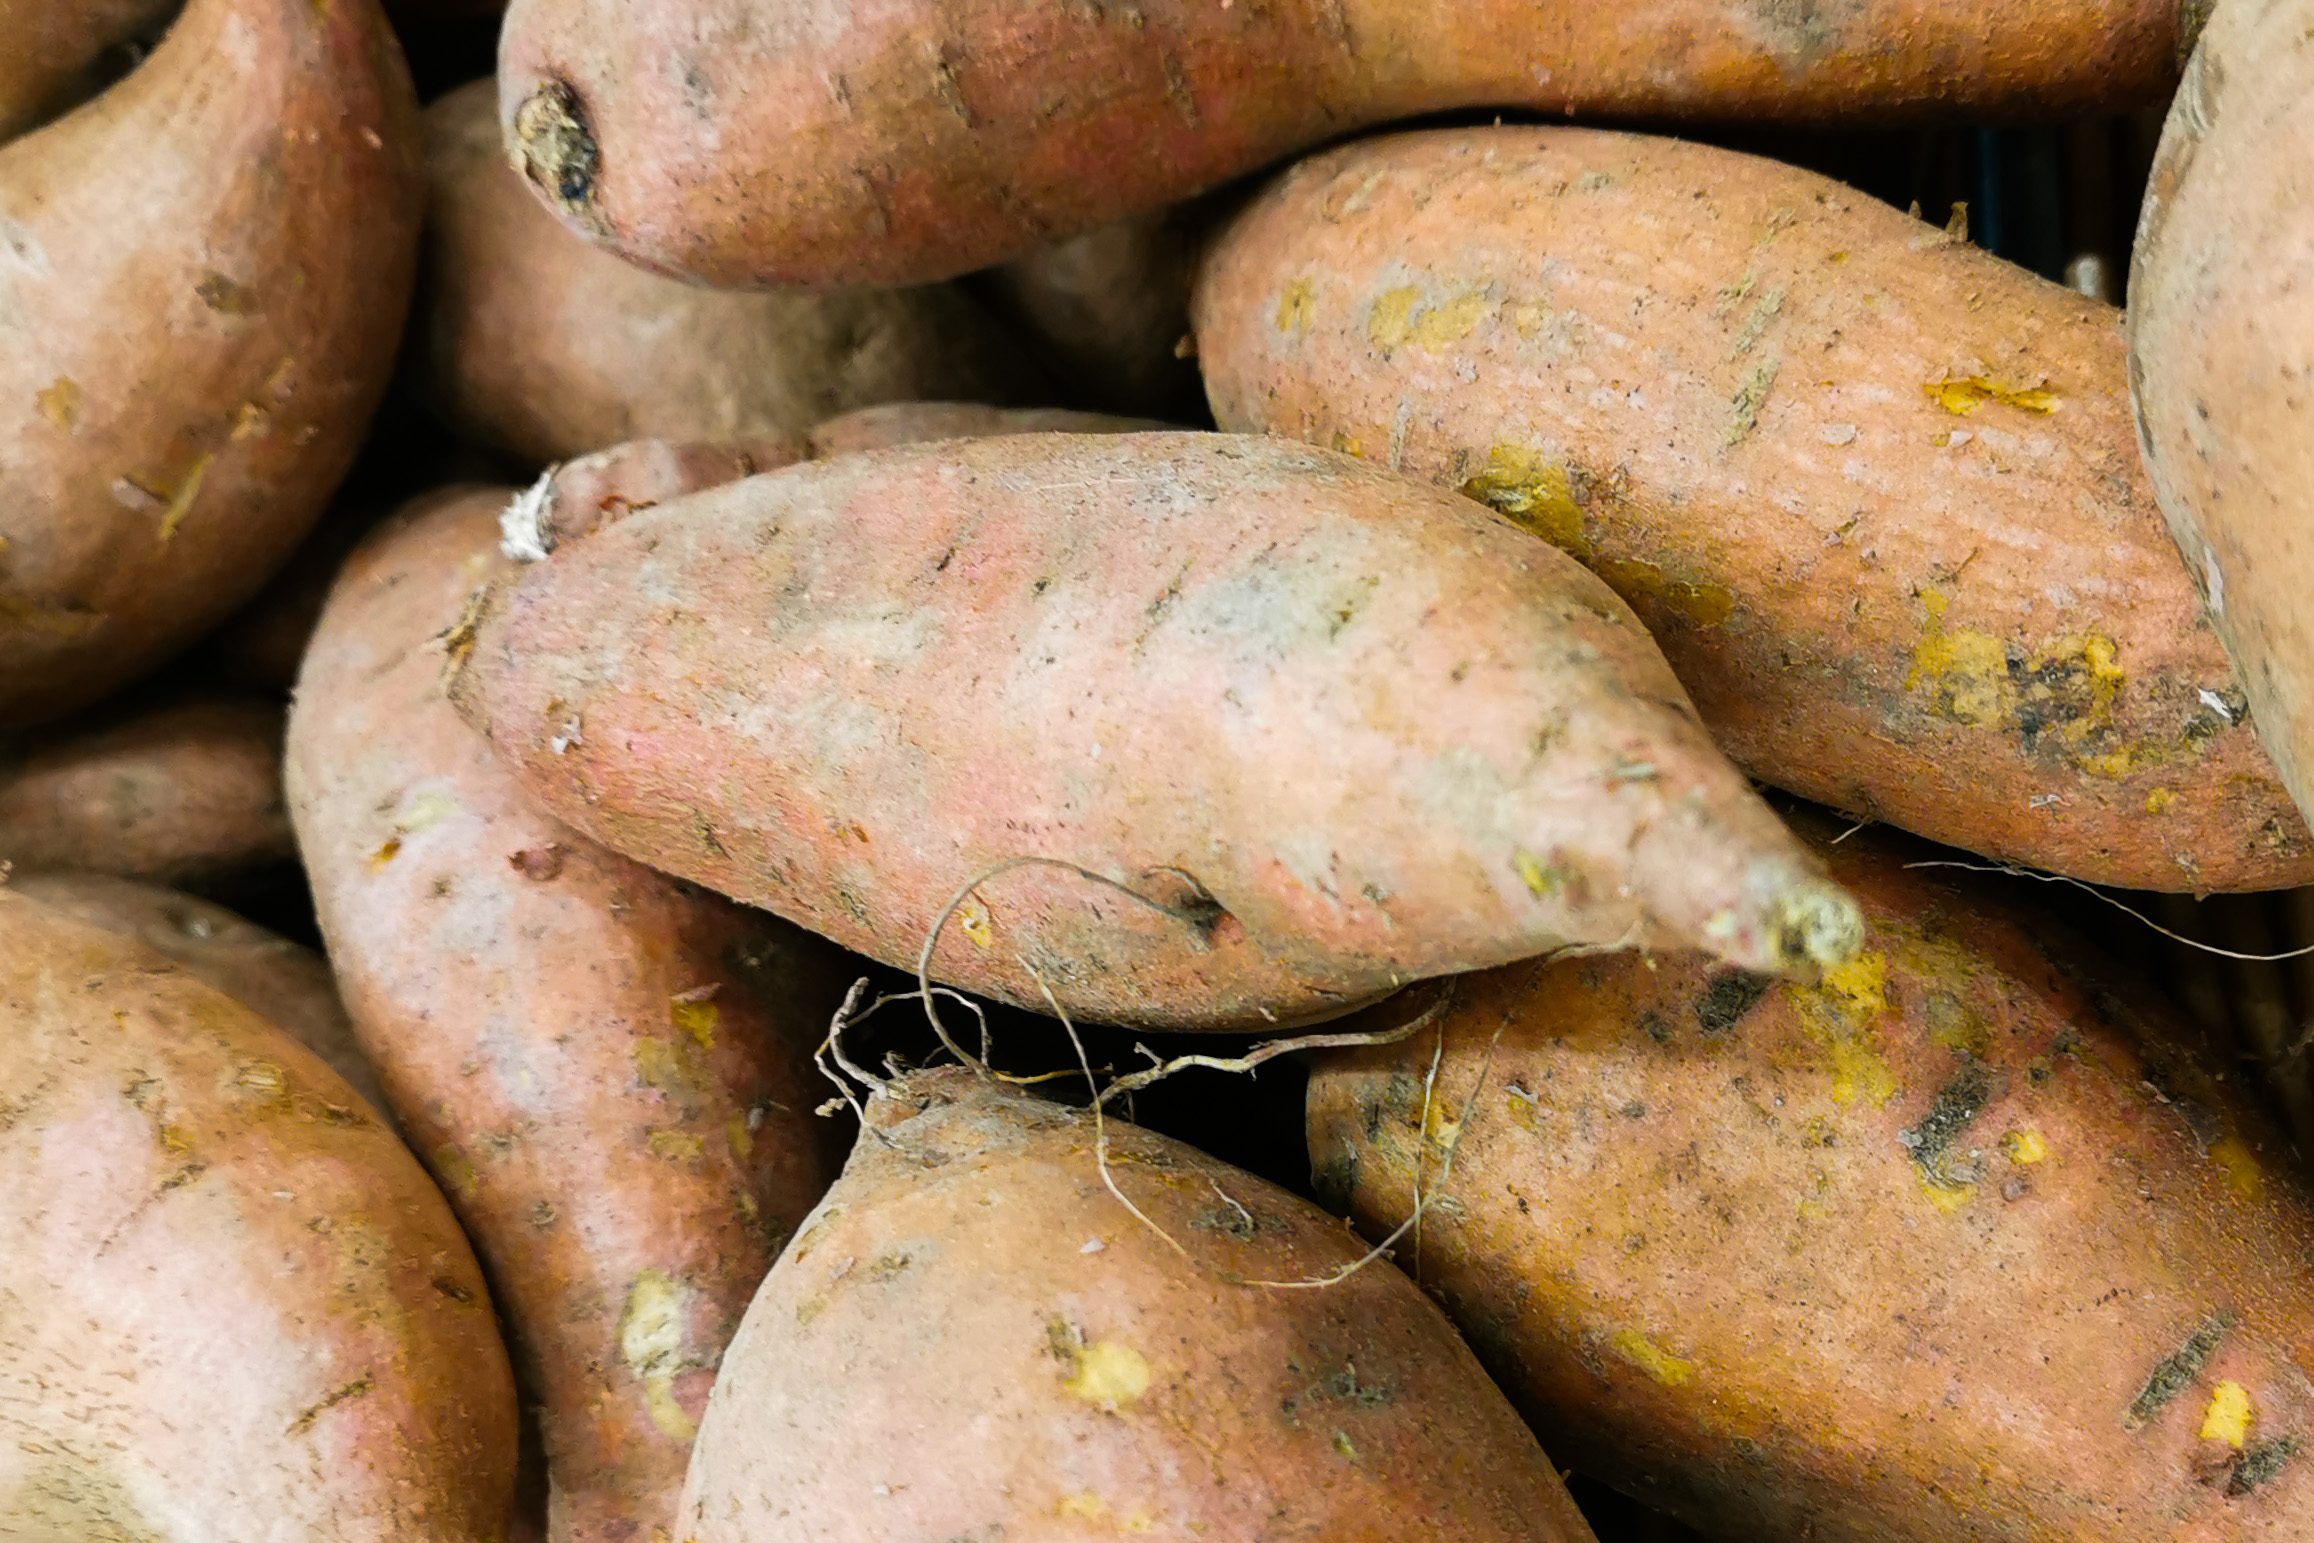 How To Tell If A Sweet Potato Is Bad? (And what the WHITE stuff means)